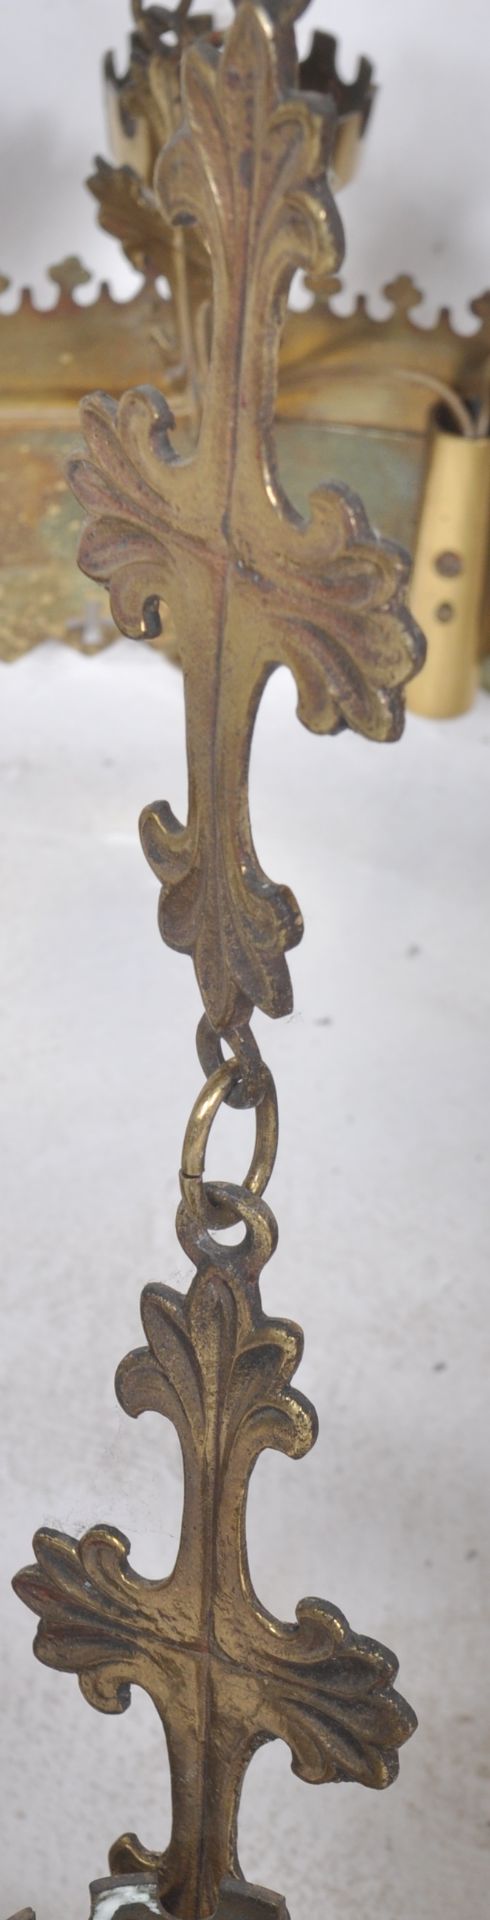 19TH CENTURY GOTHIC BRASS WORKED CHANDELIER - Image 7 of 7